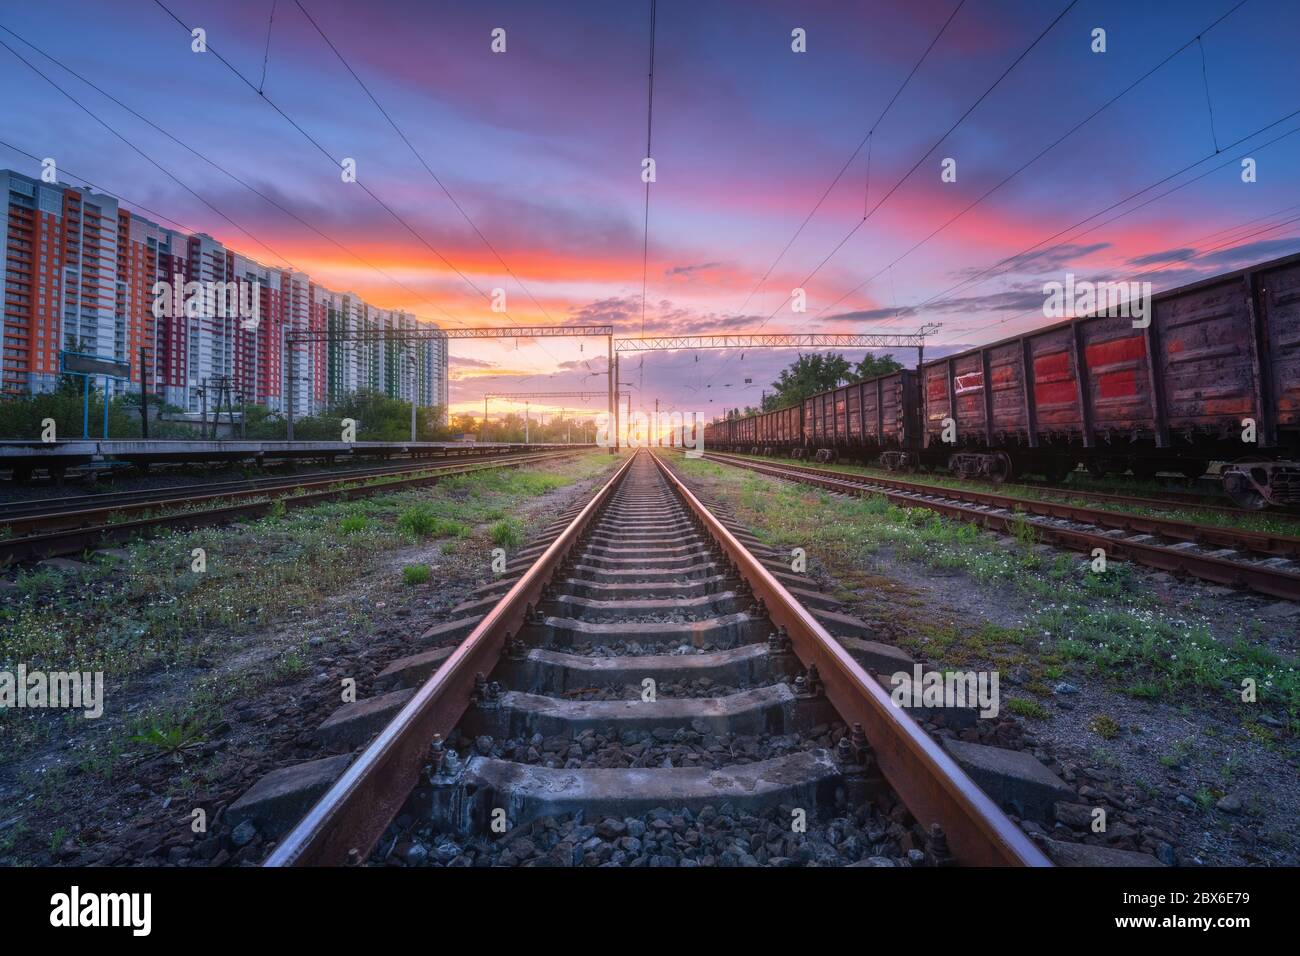 Railway station with freight trains at sunset Stock Photo